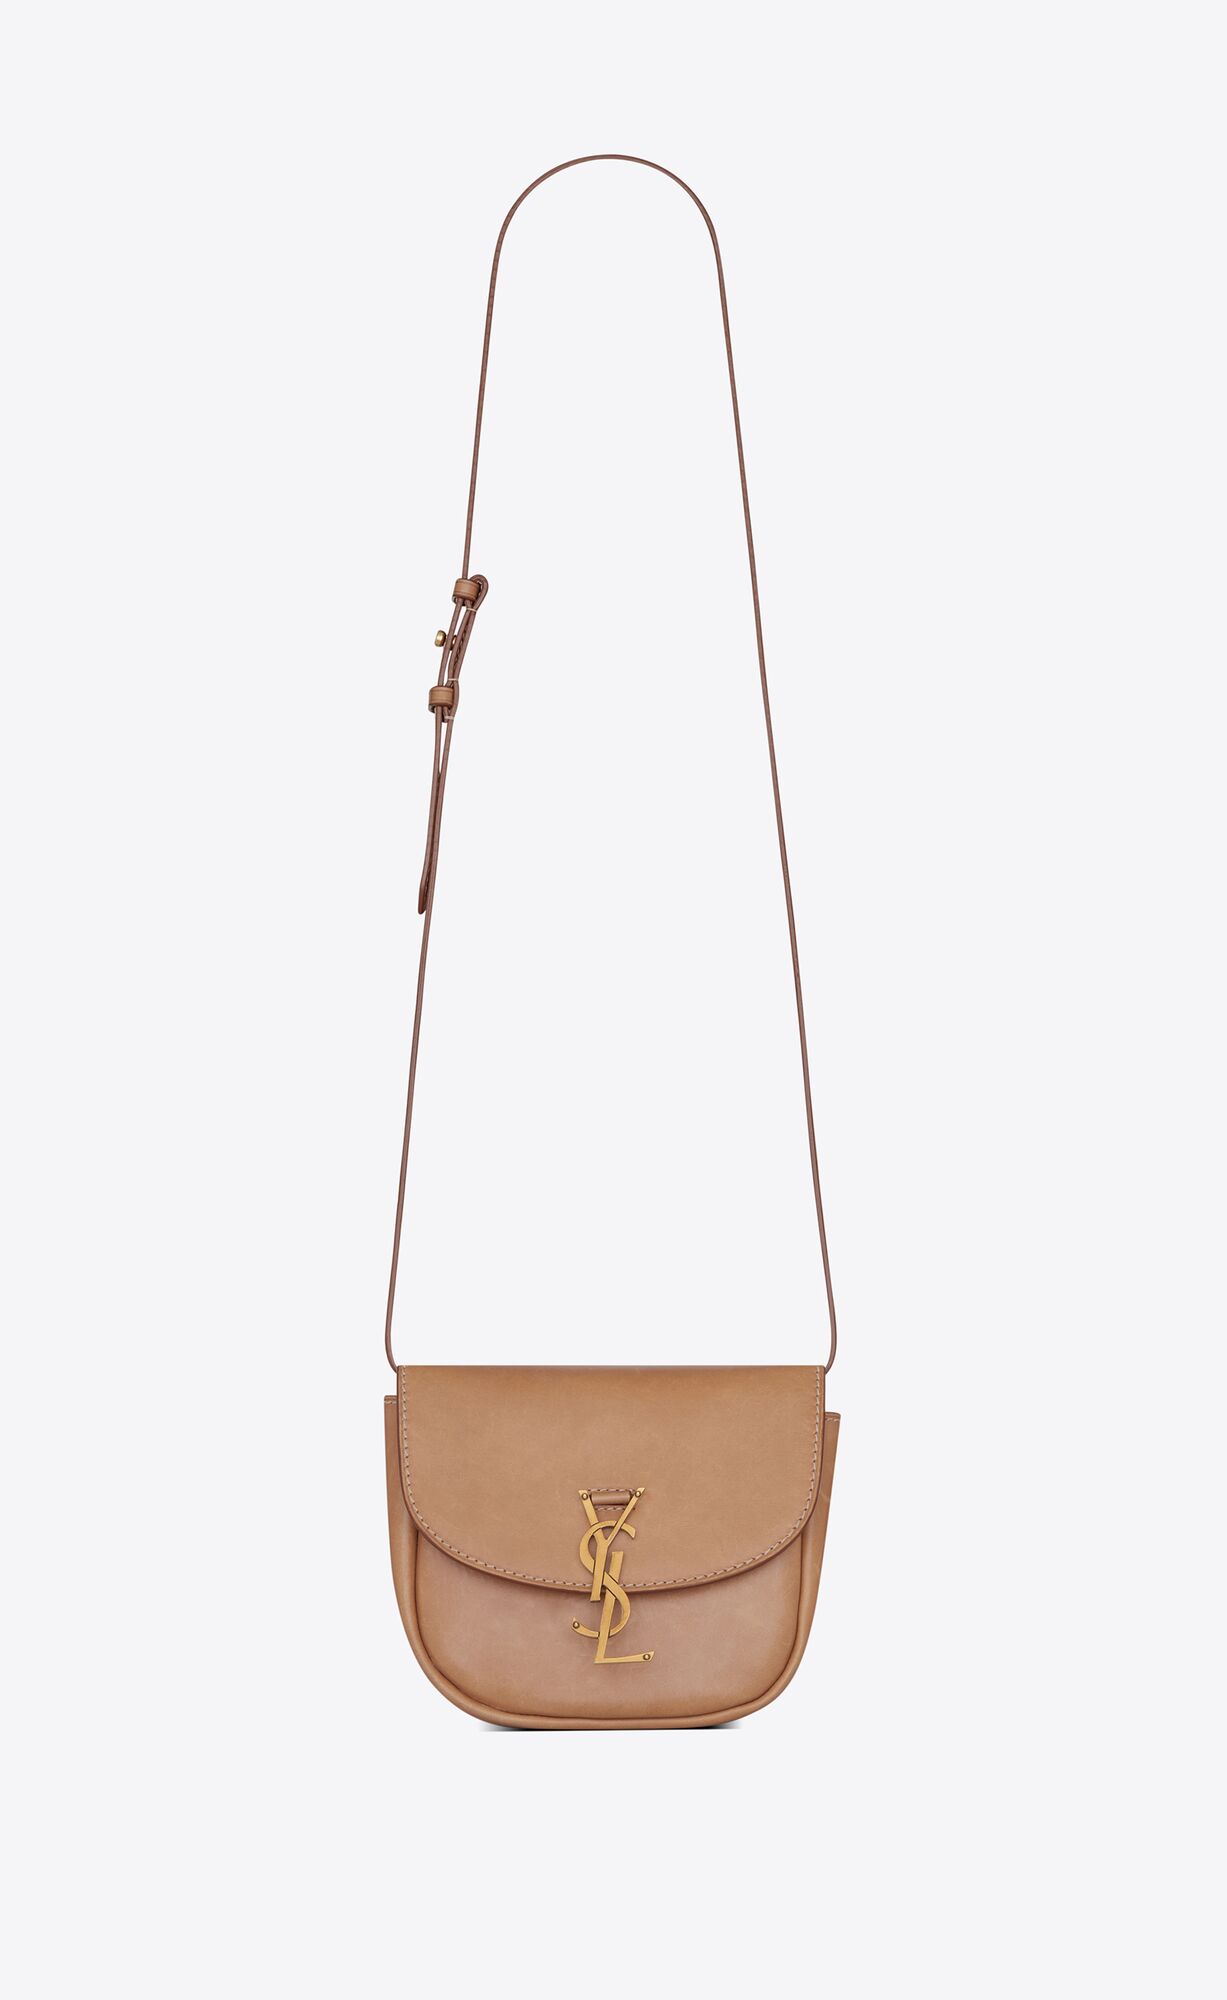 Saint Laurent Kaia Small Satchel In Smooth Vintage Leather – Brown Gold – 619740BWR6W2725